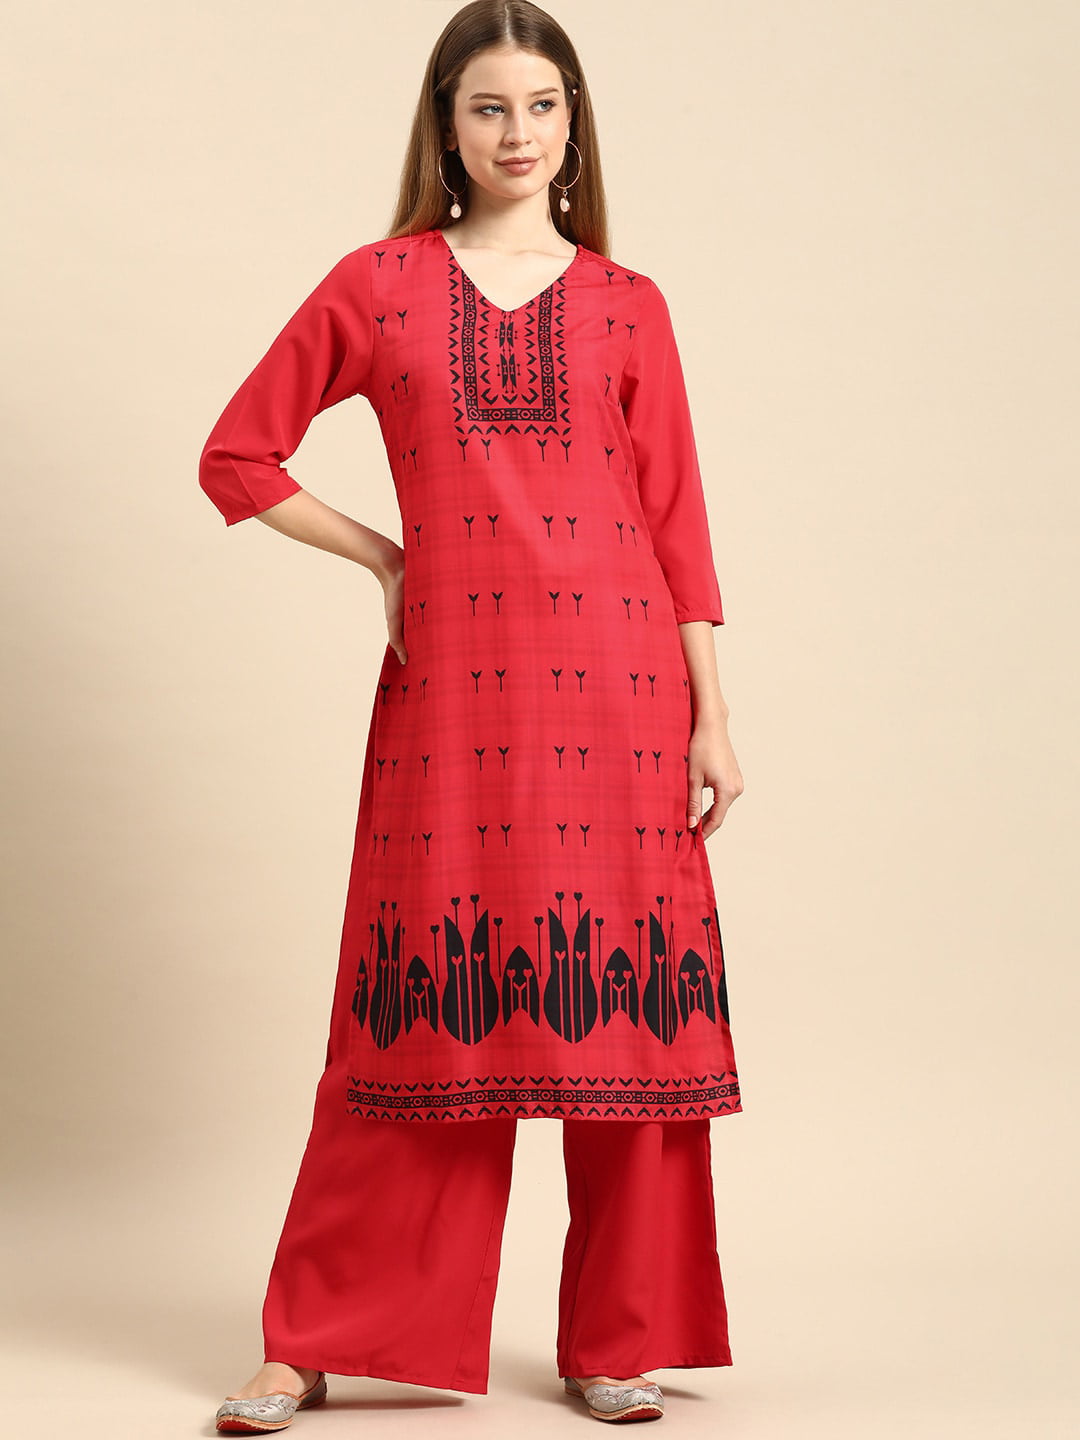 A-Line Kurtas - Buy from Latest Range of A-Line Kurtis Online at Myntra